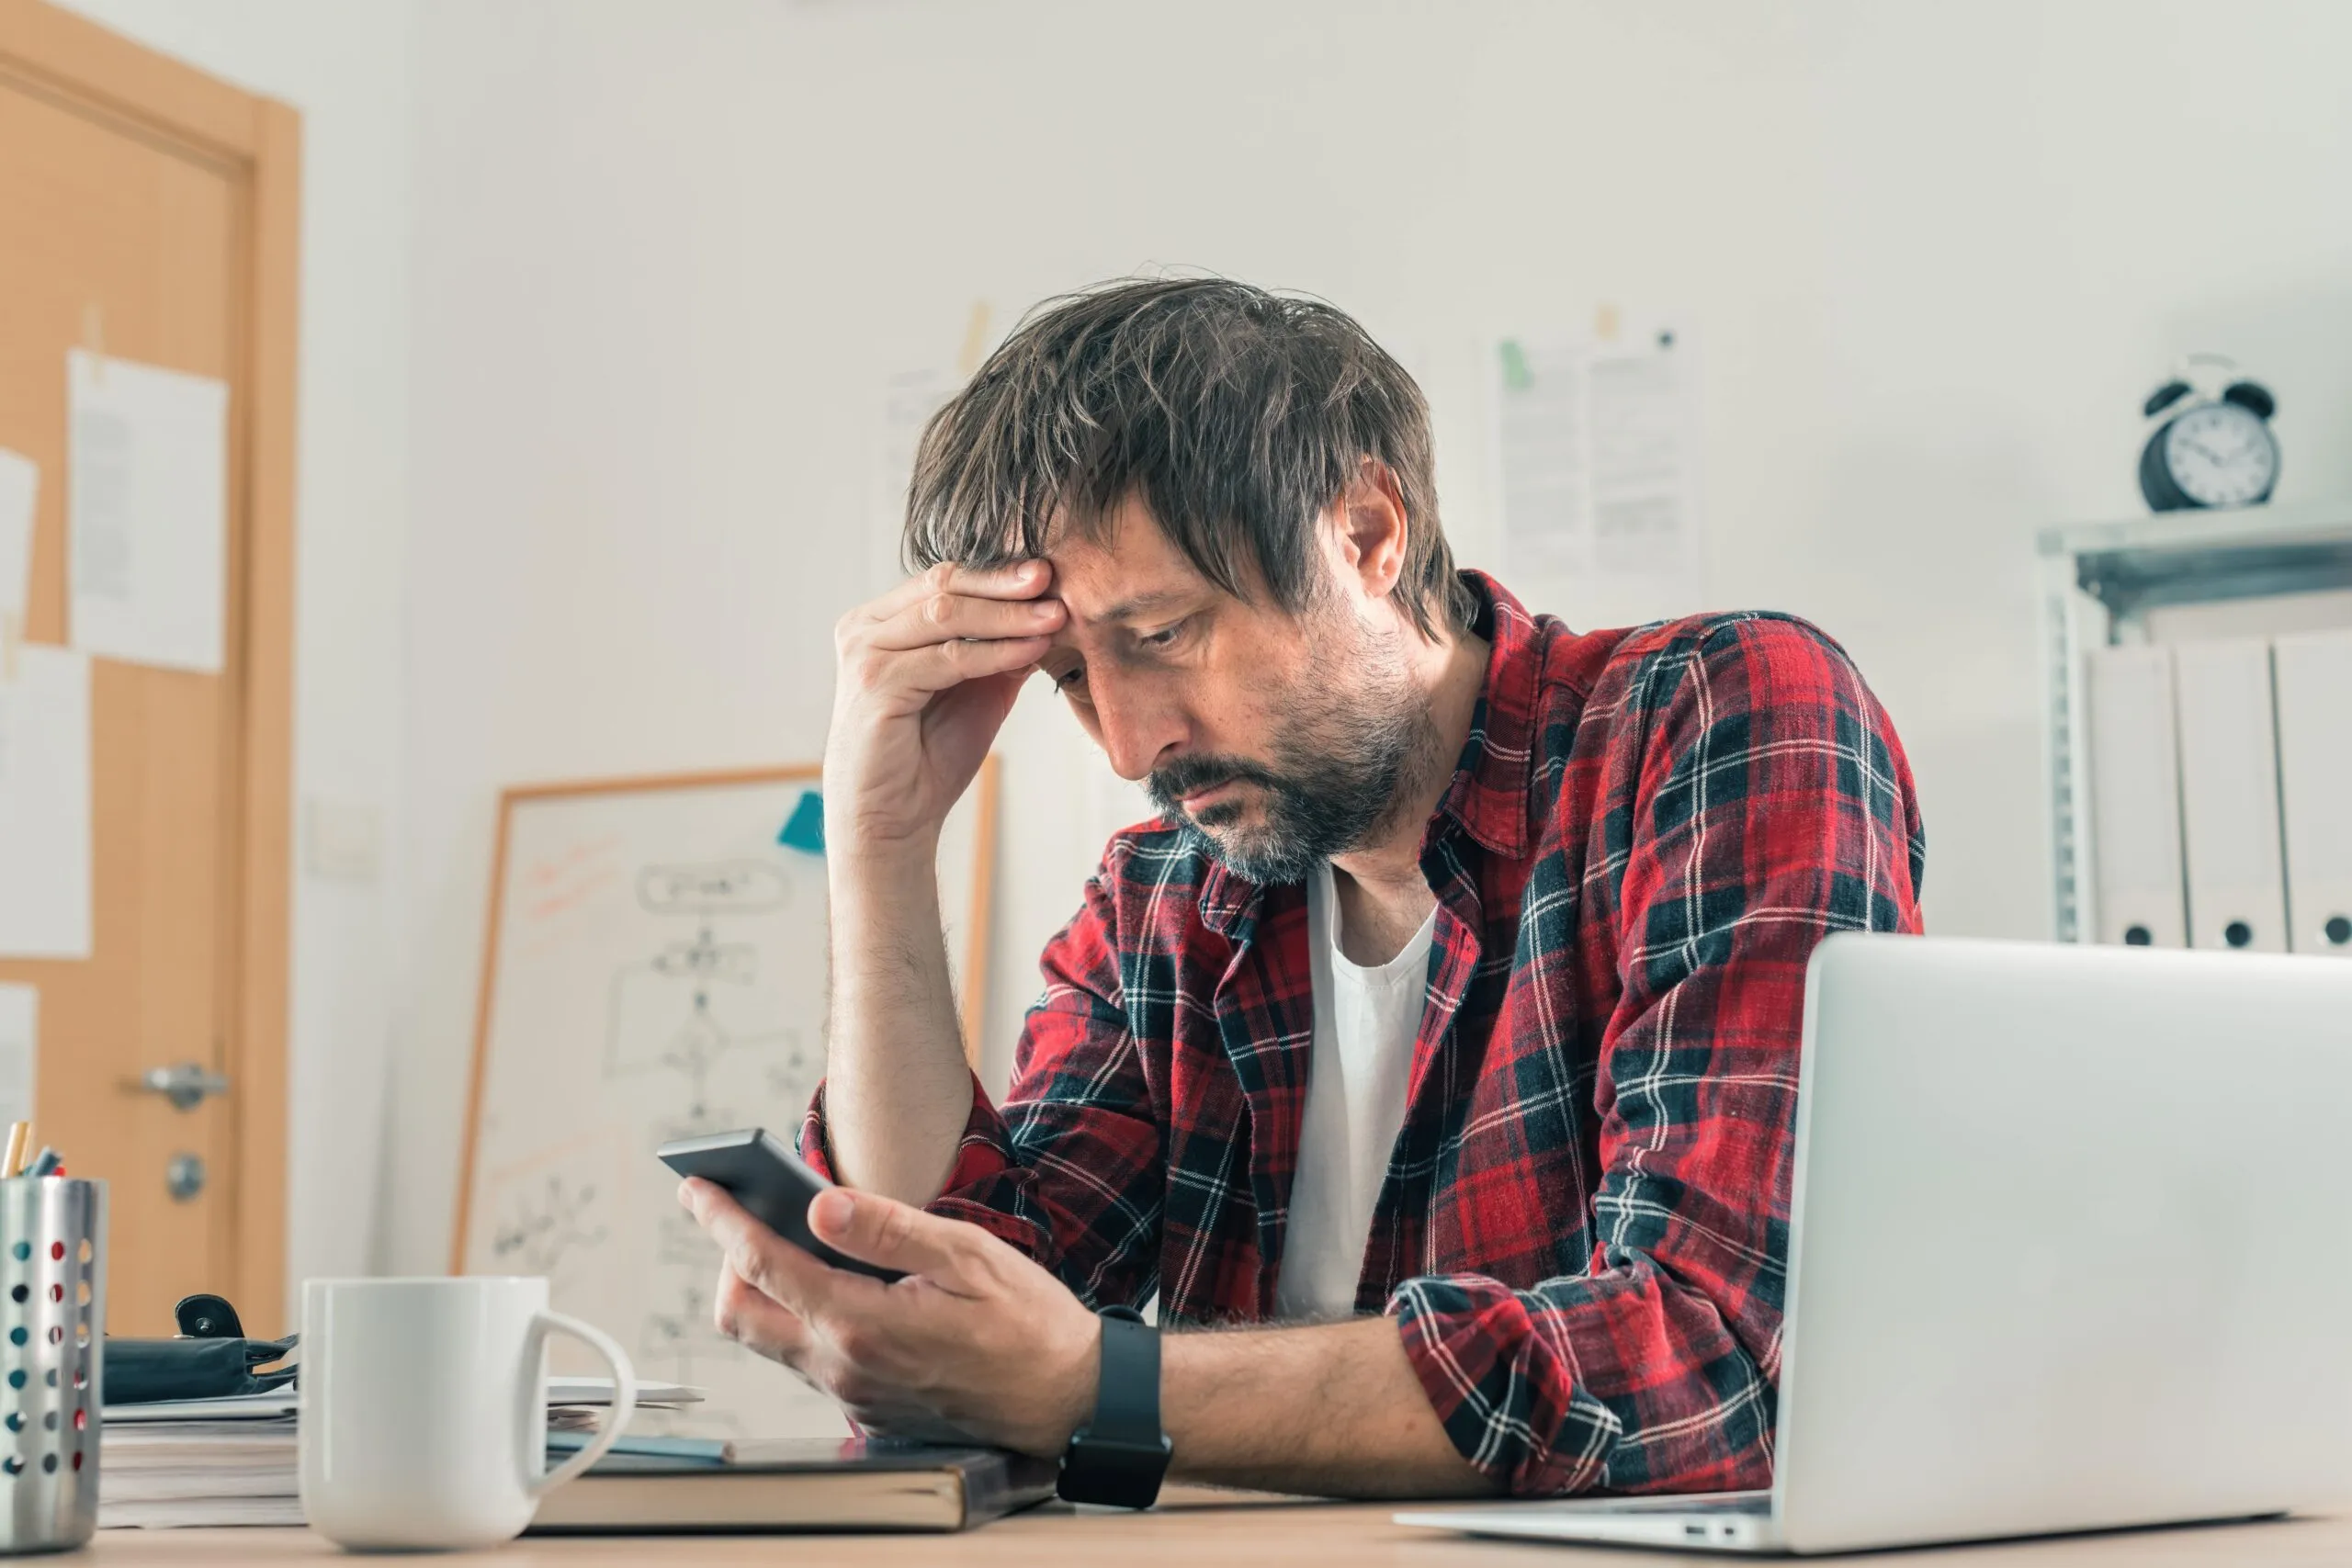 Man stares at his phone in frustration. Keep the companies accountable for their mistakes and contact a Wyoming consumer fraud lawyer if you’ve been a victim of a scam.